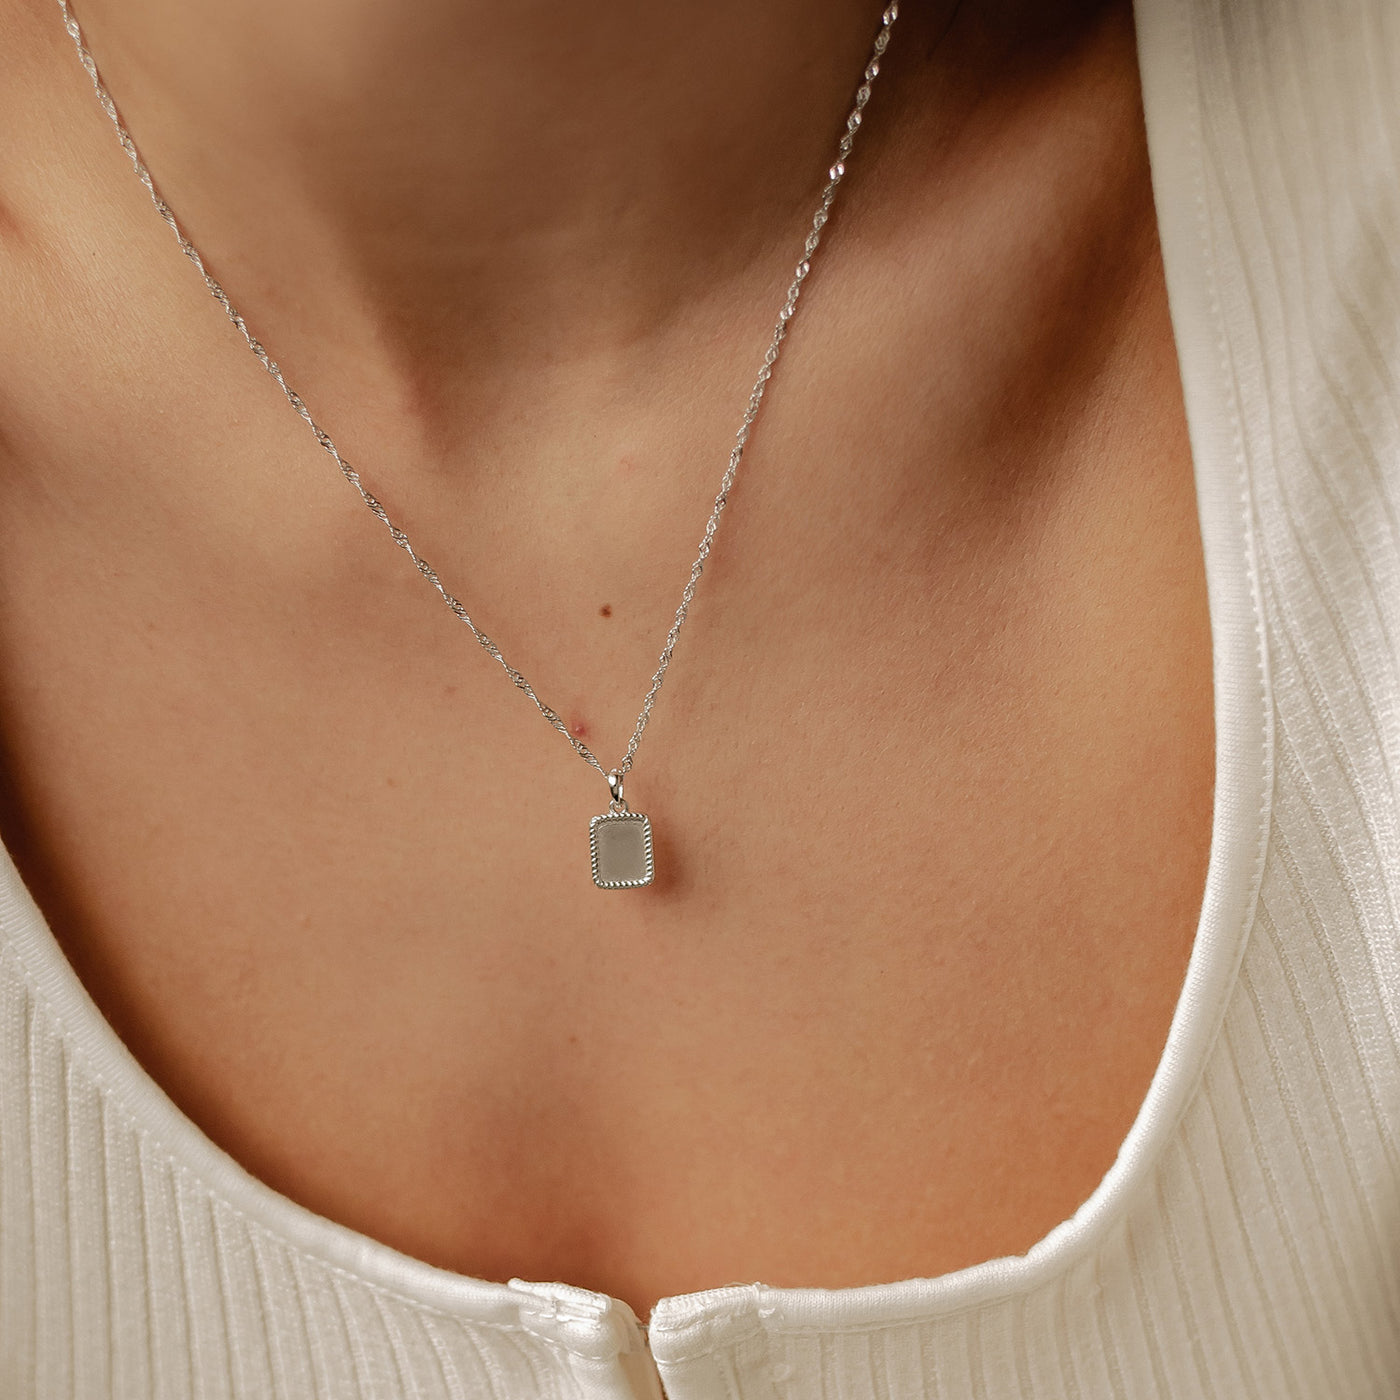 Square Rope Pendant Necklace Sterling Silver